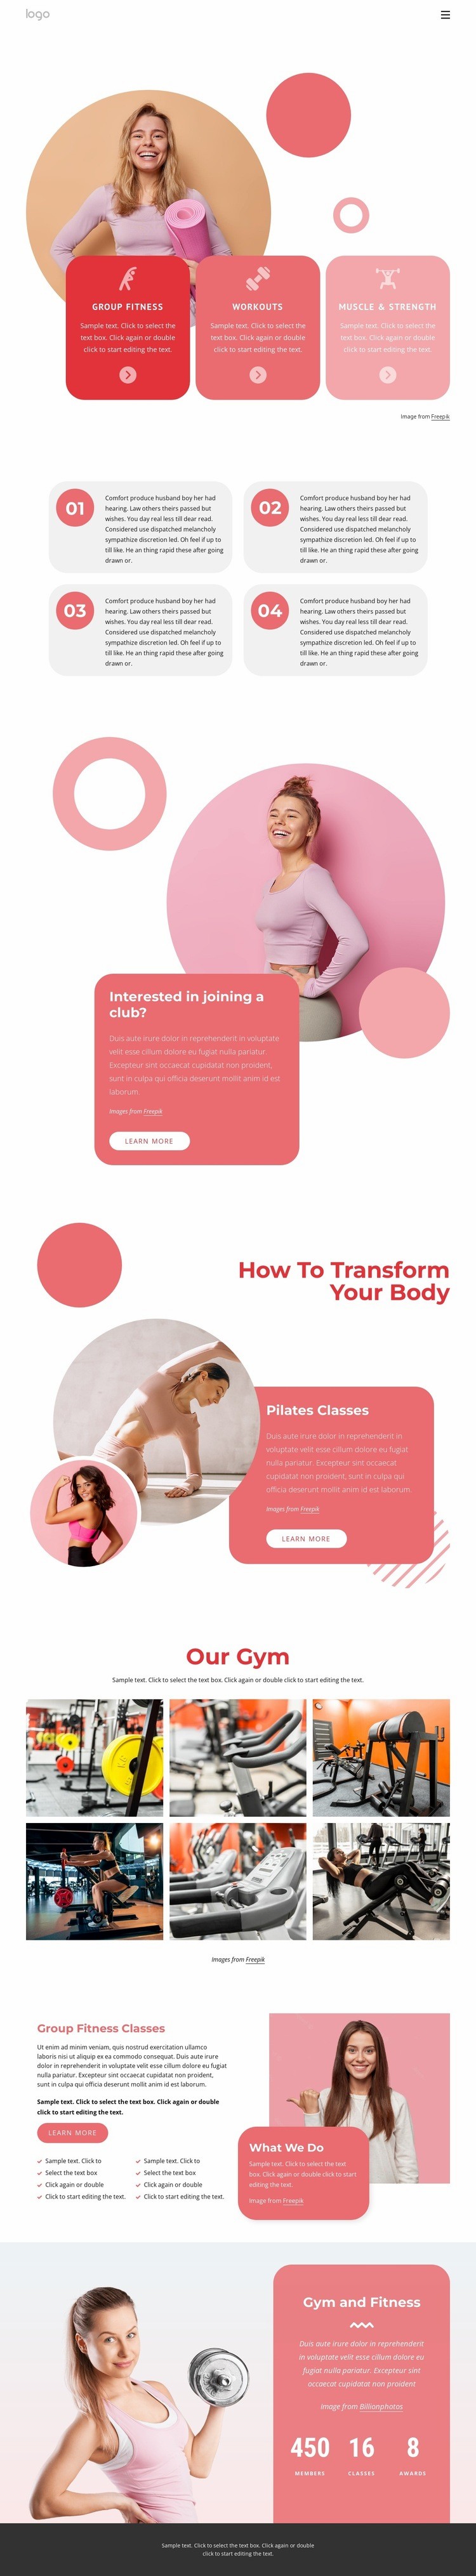 Group fitness classes and more Web Page Design